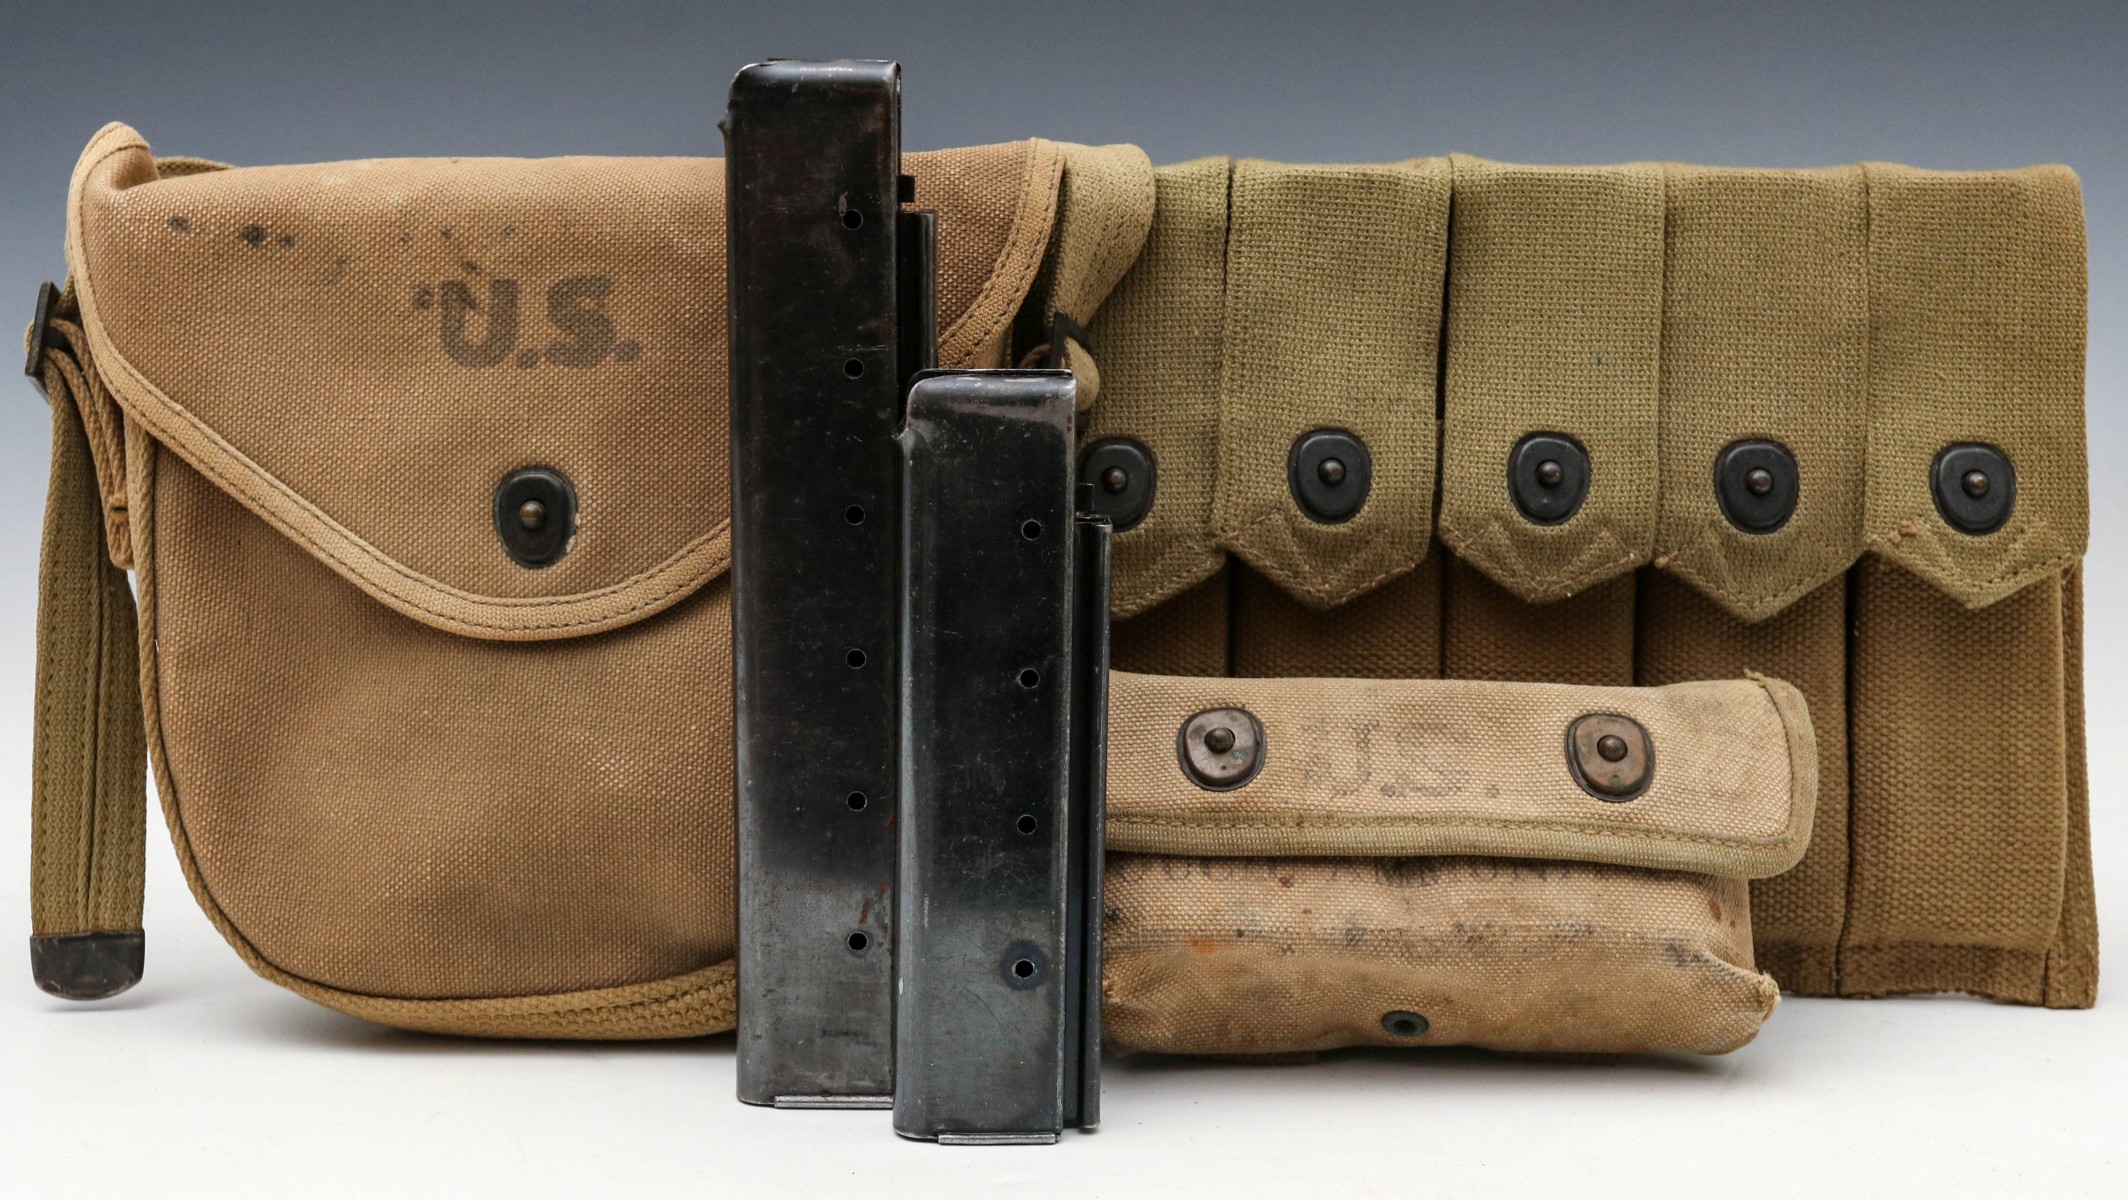 THOMPSON DRUM MAG POUCH AND OTHER WEB GEAR